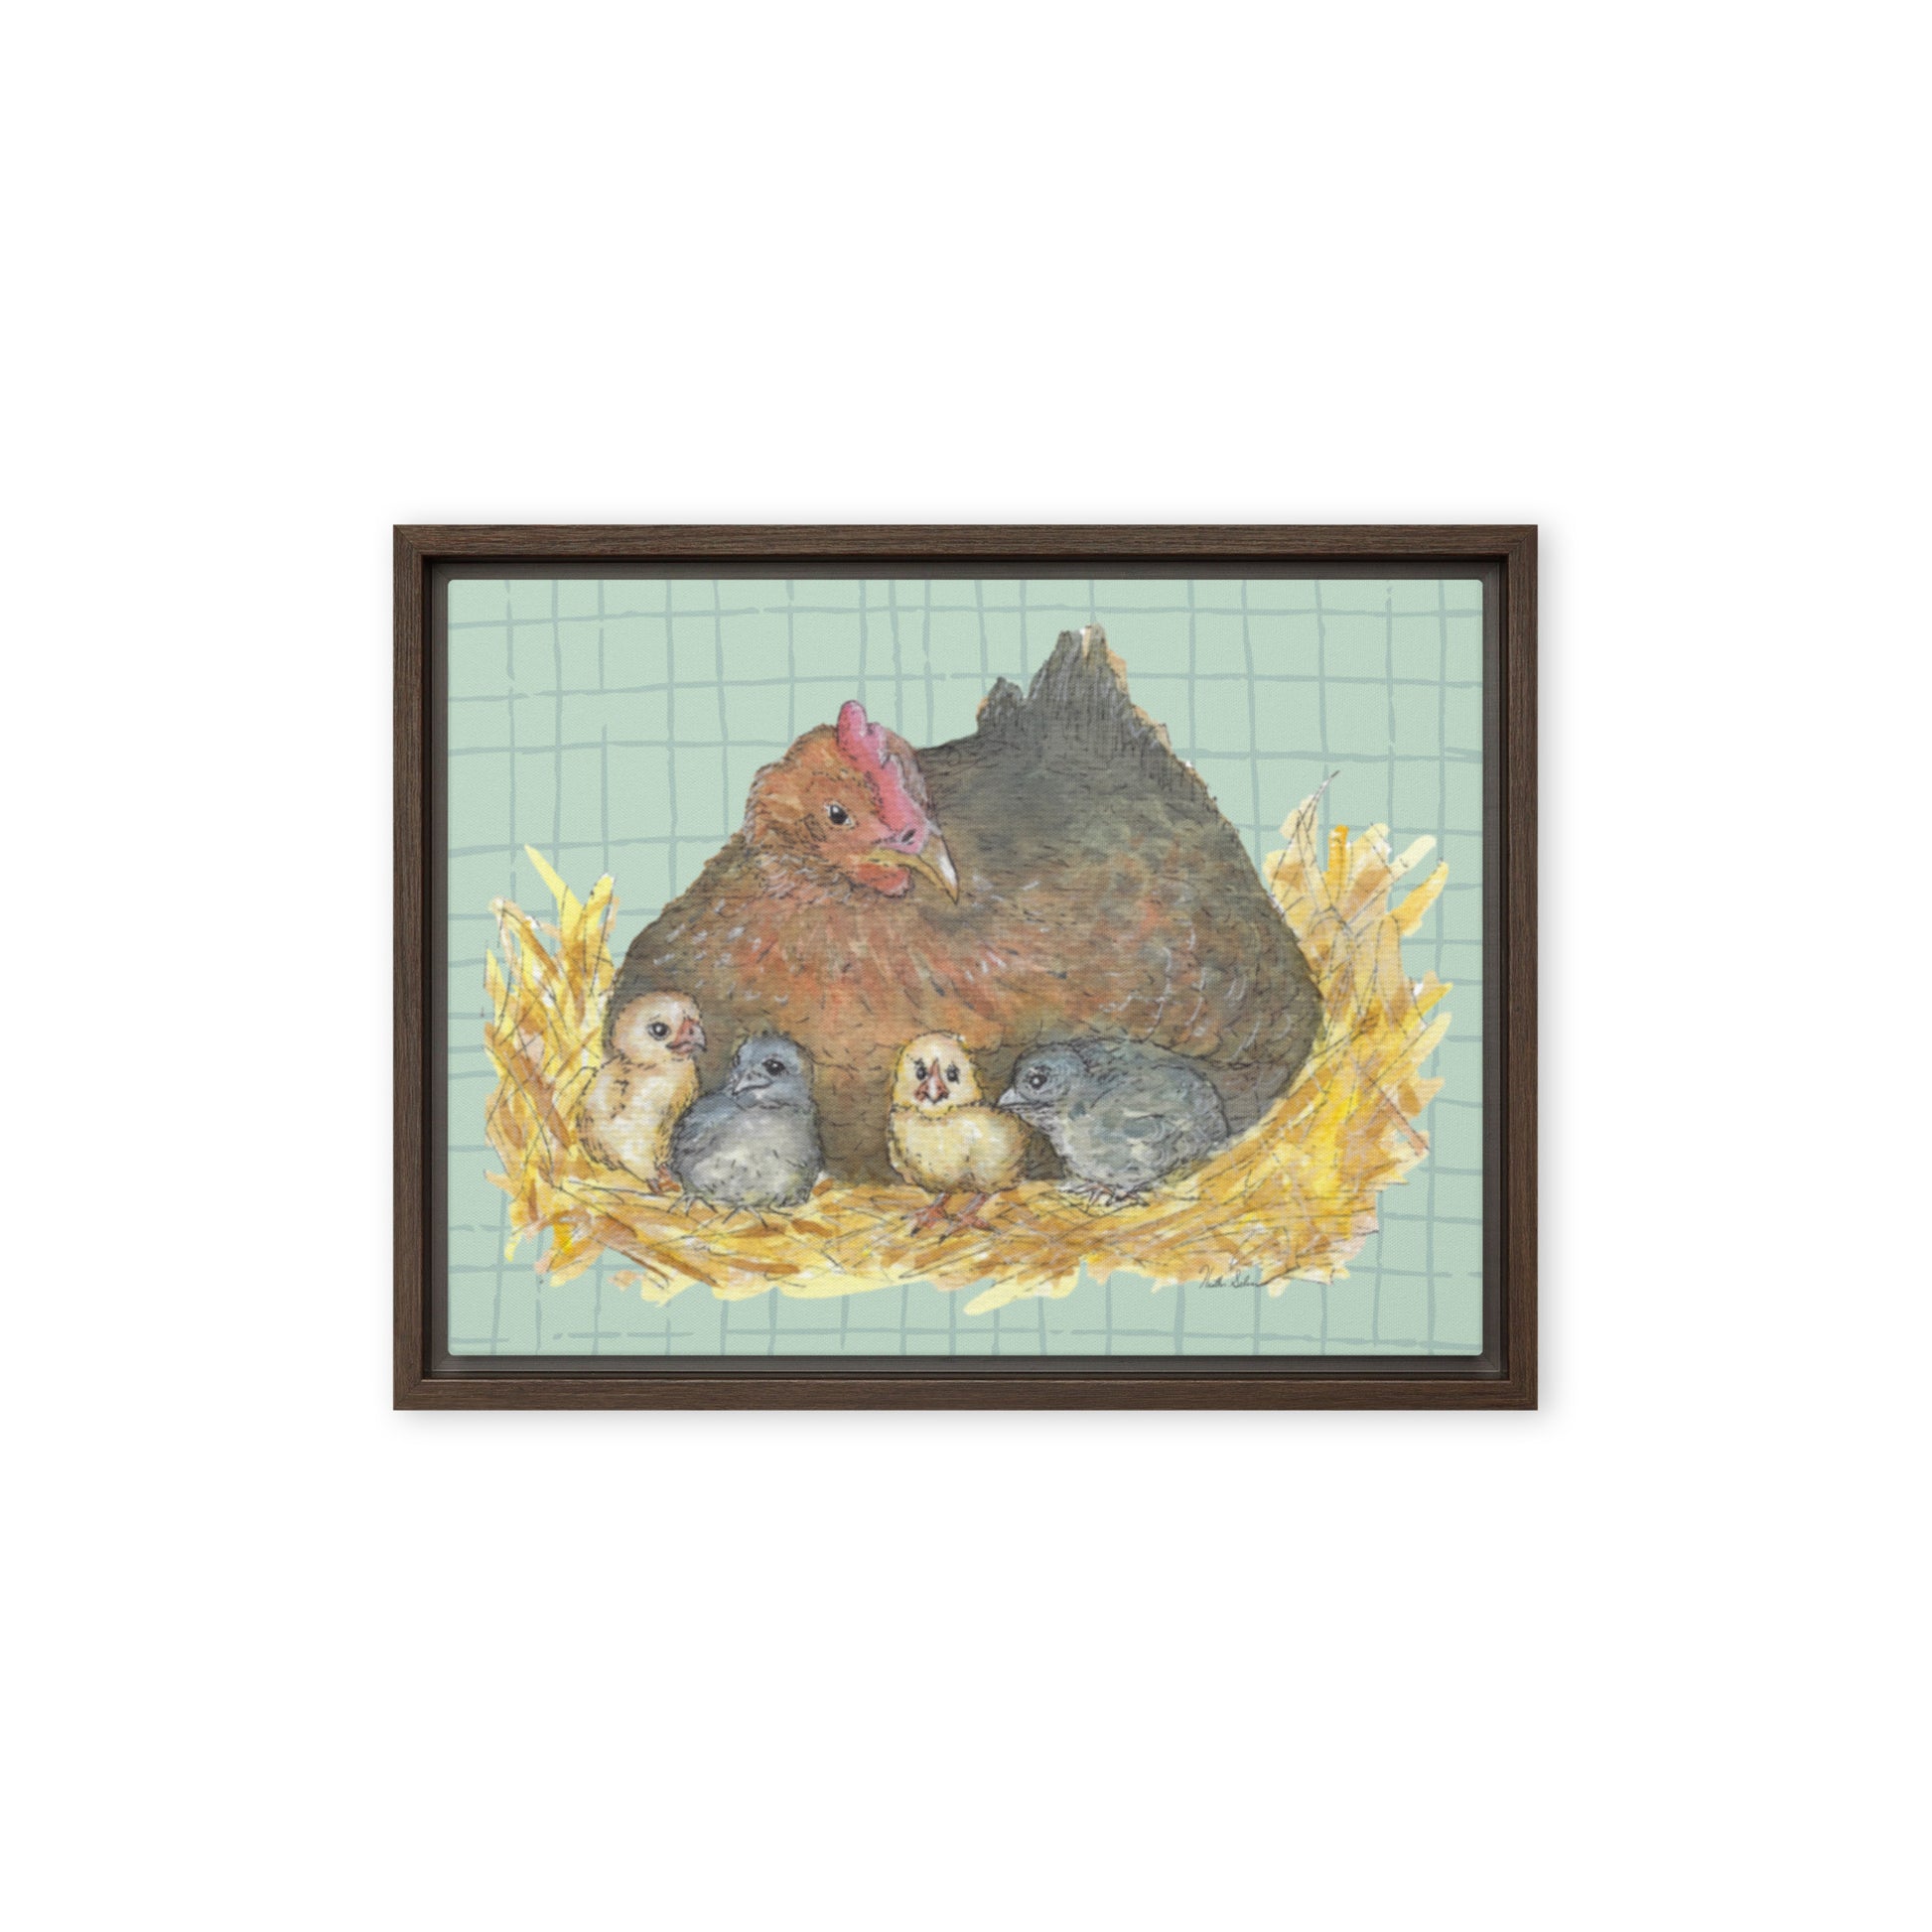 12 by 16 inch Mother Hen Floating Frame Canvas Wall Art. Heather Silver's watercolor painting, Mother Hen, with a green crosshatched background, printed on a stretched canvas and framed with a dark brown pine frame. Hanging hardware included.